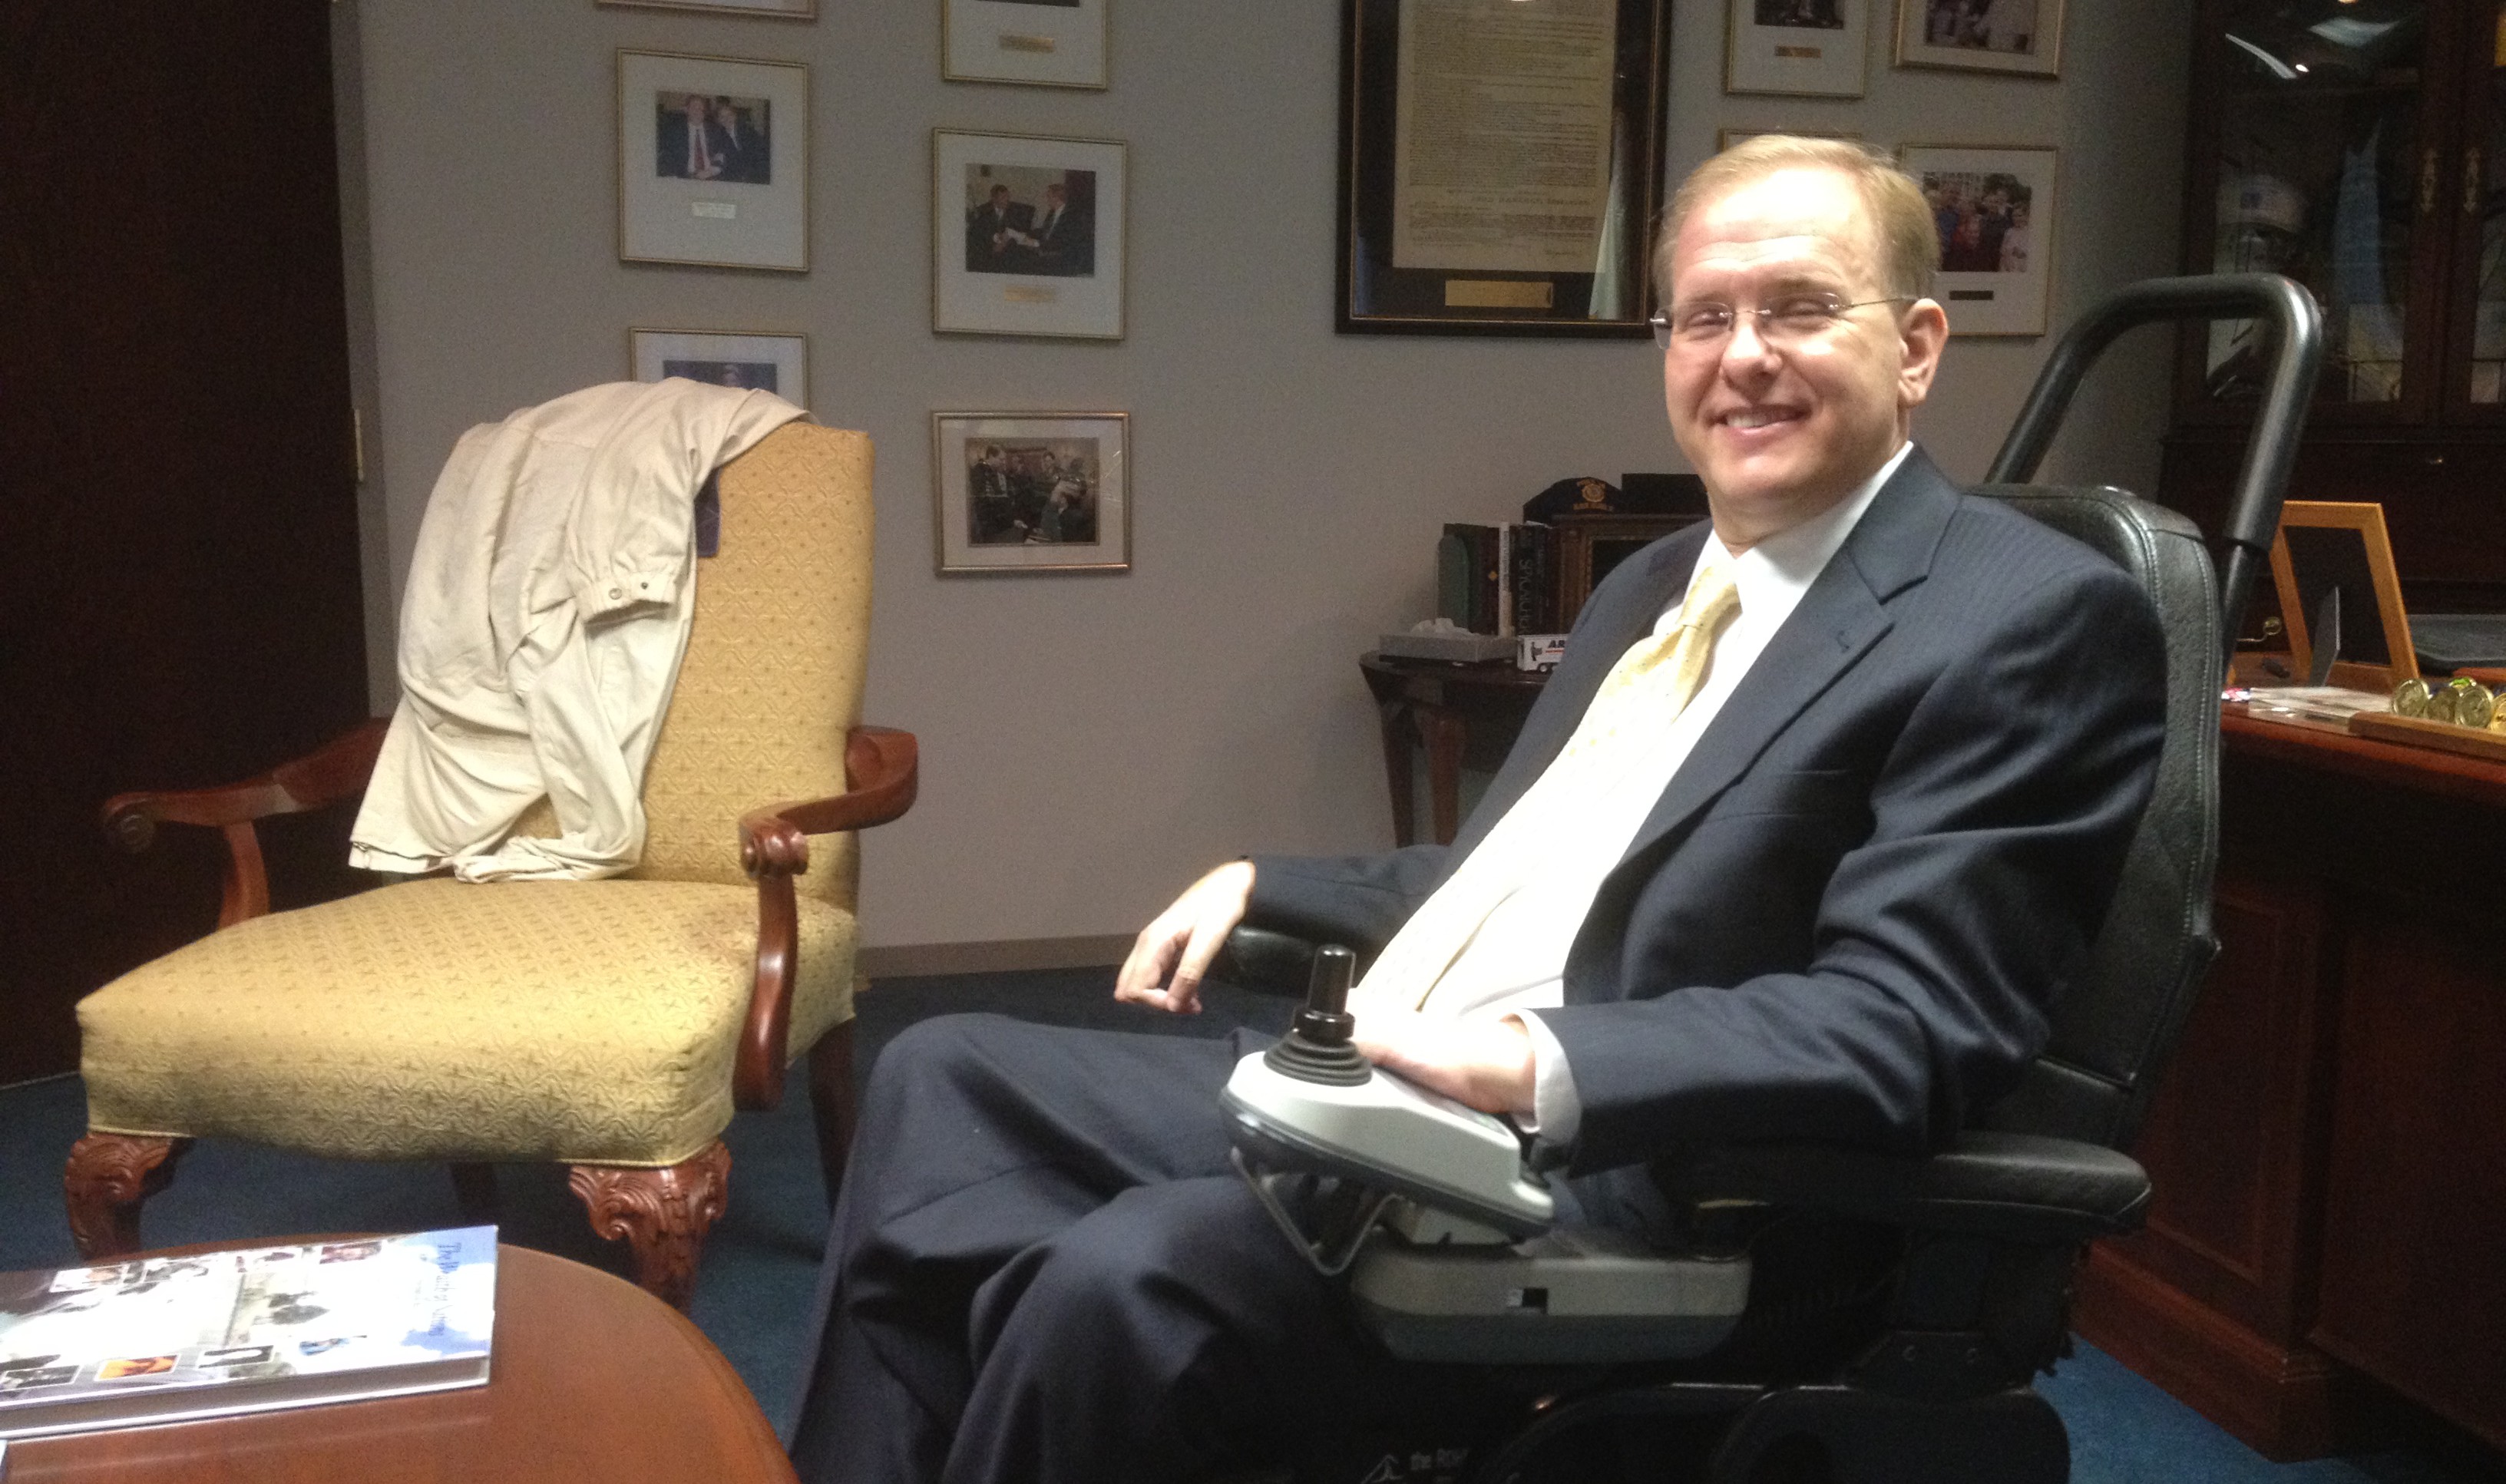 Jim Langevin seated in a power wheelchair in his office